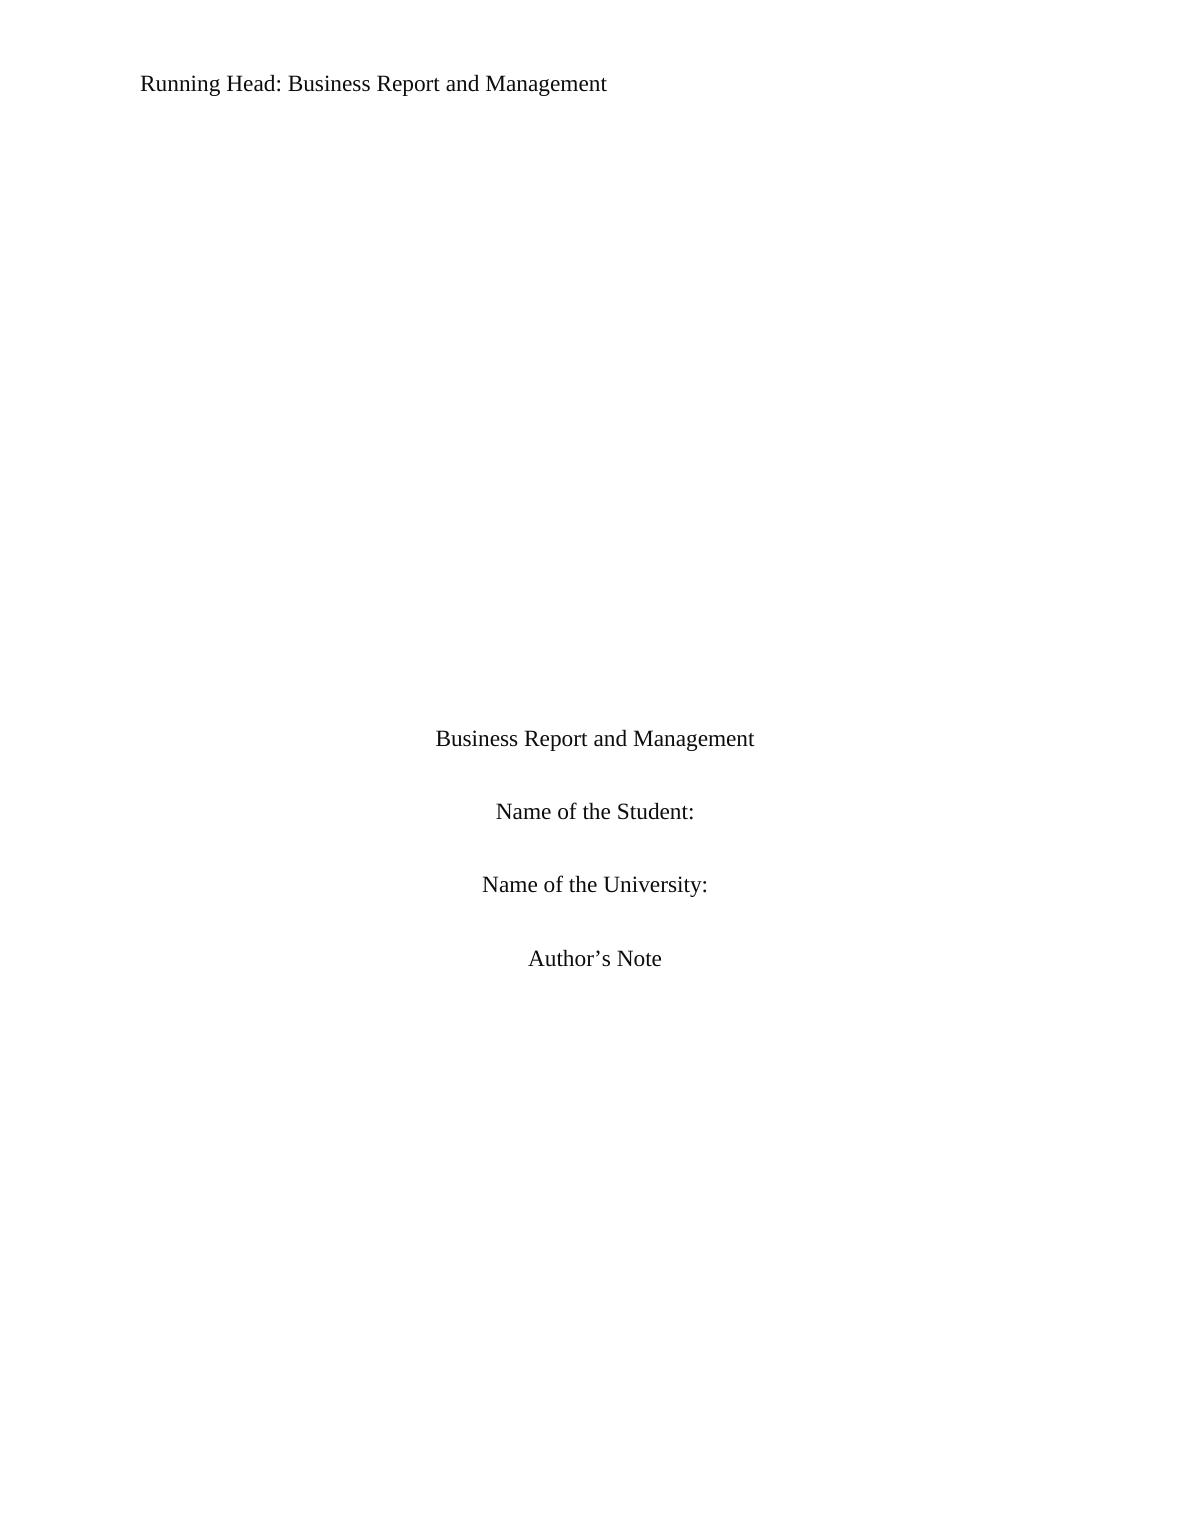 Business Report and Management_1